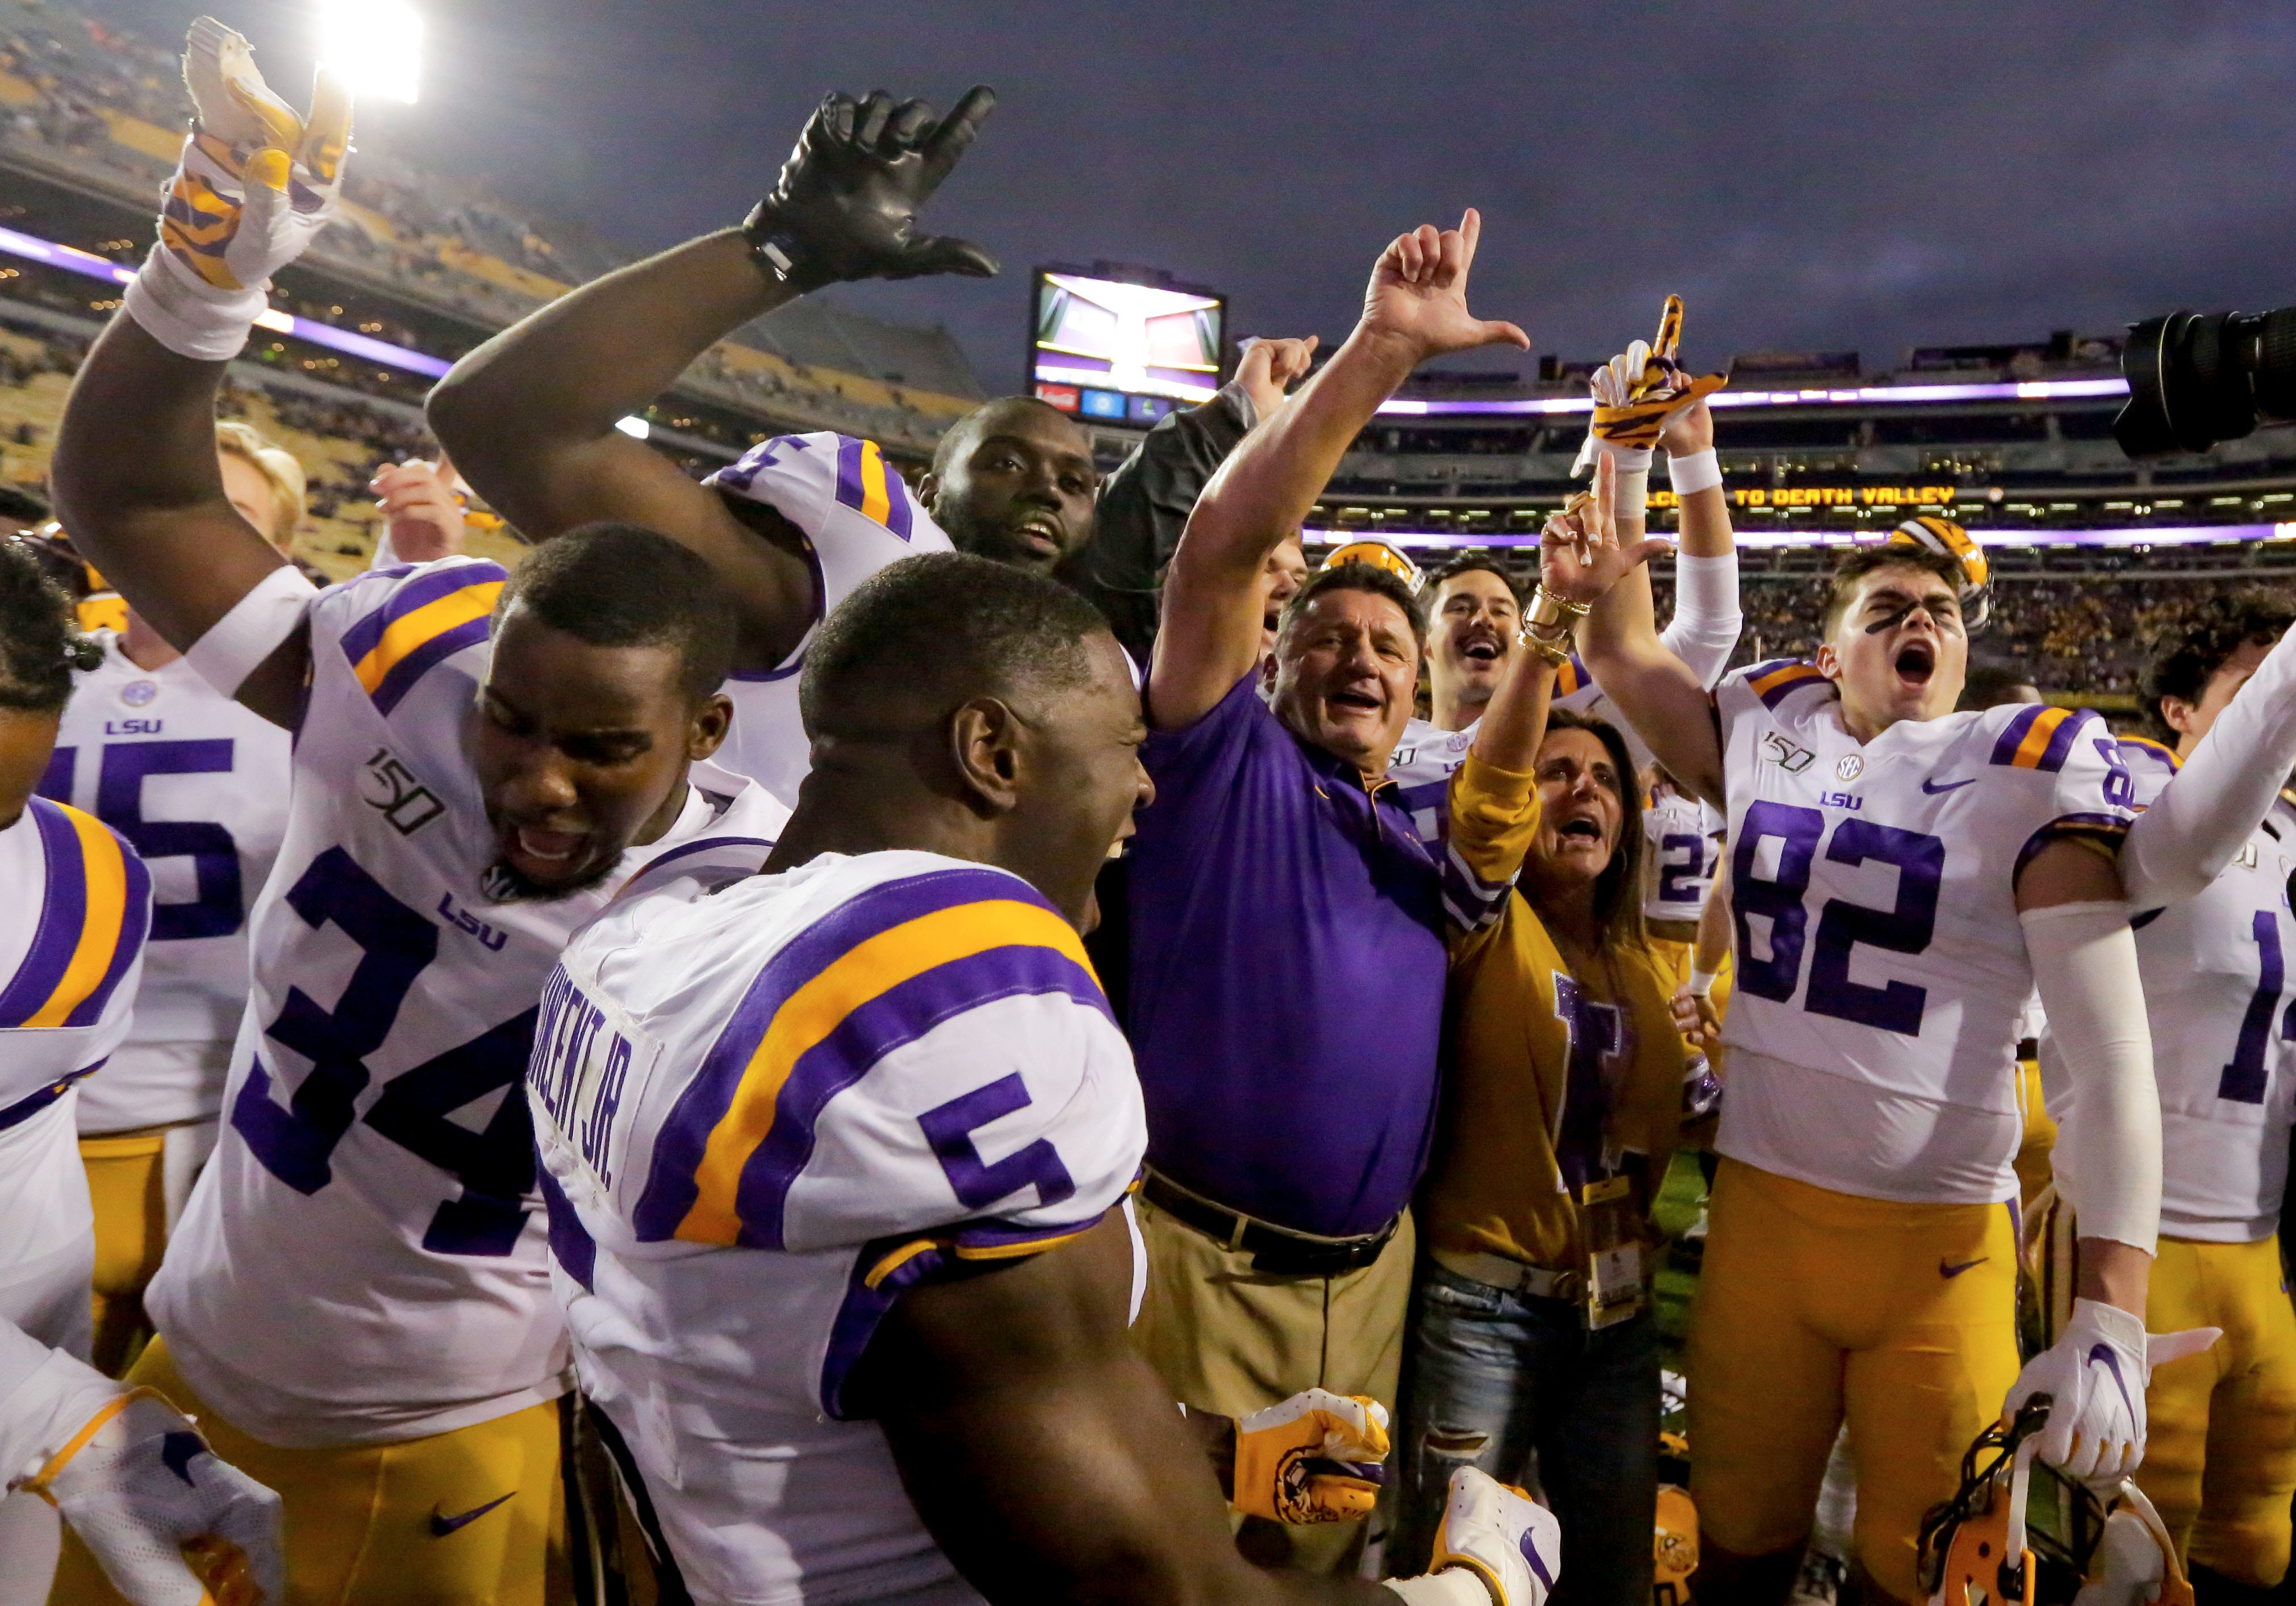 Has LSU finally caught up to Alabama in football talent?